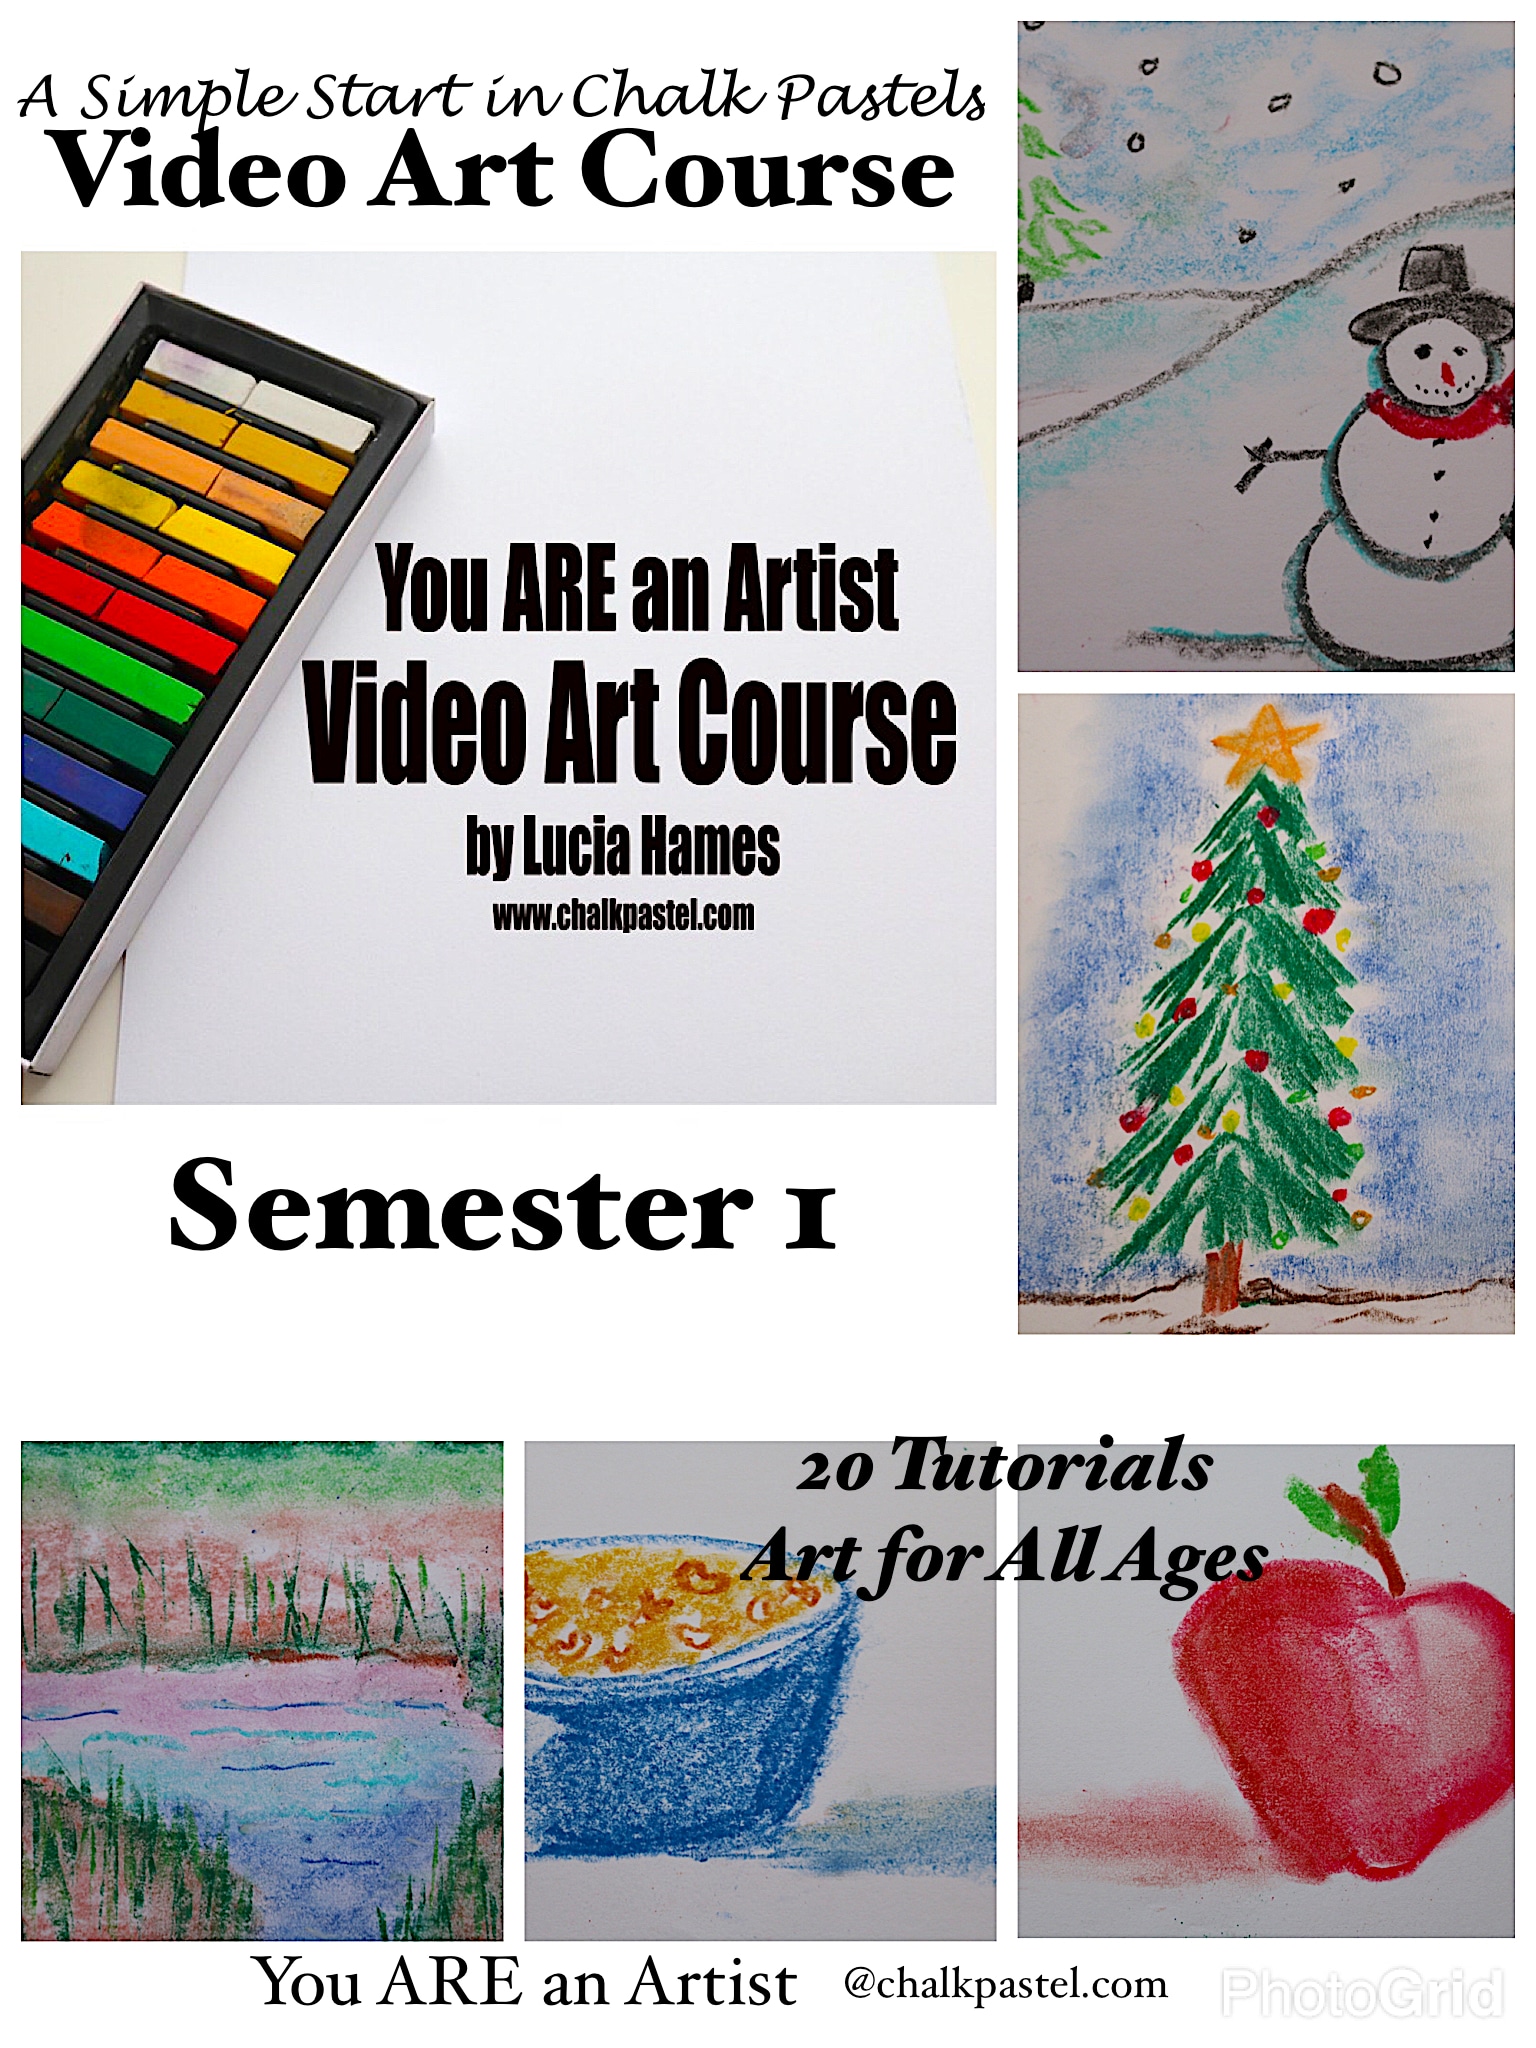 A Simple Start in Chalk Pastels Video Art Course Semester 1 - lessons from a Master Artist you can take over and over again from any device!